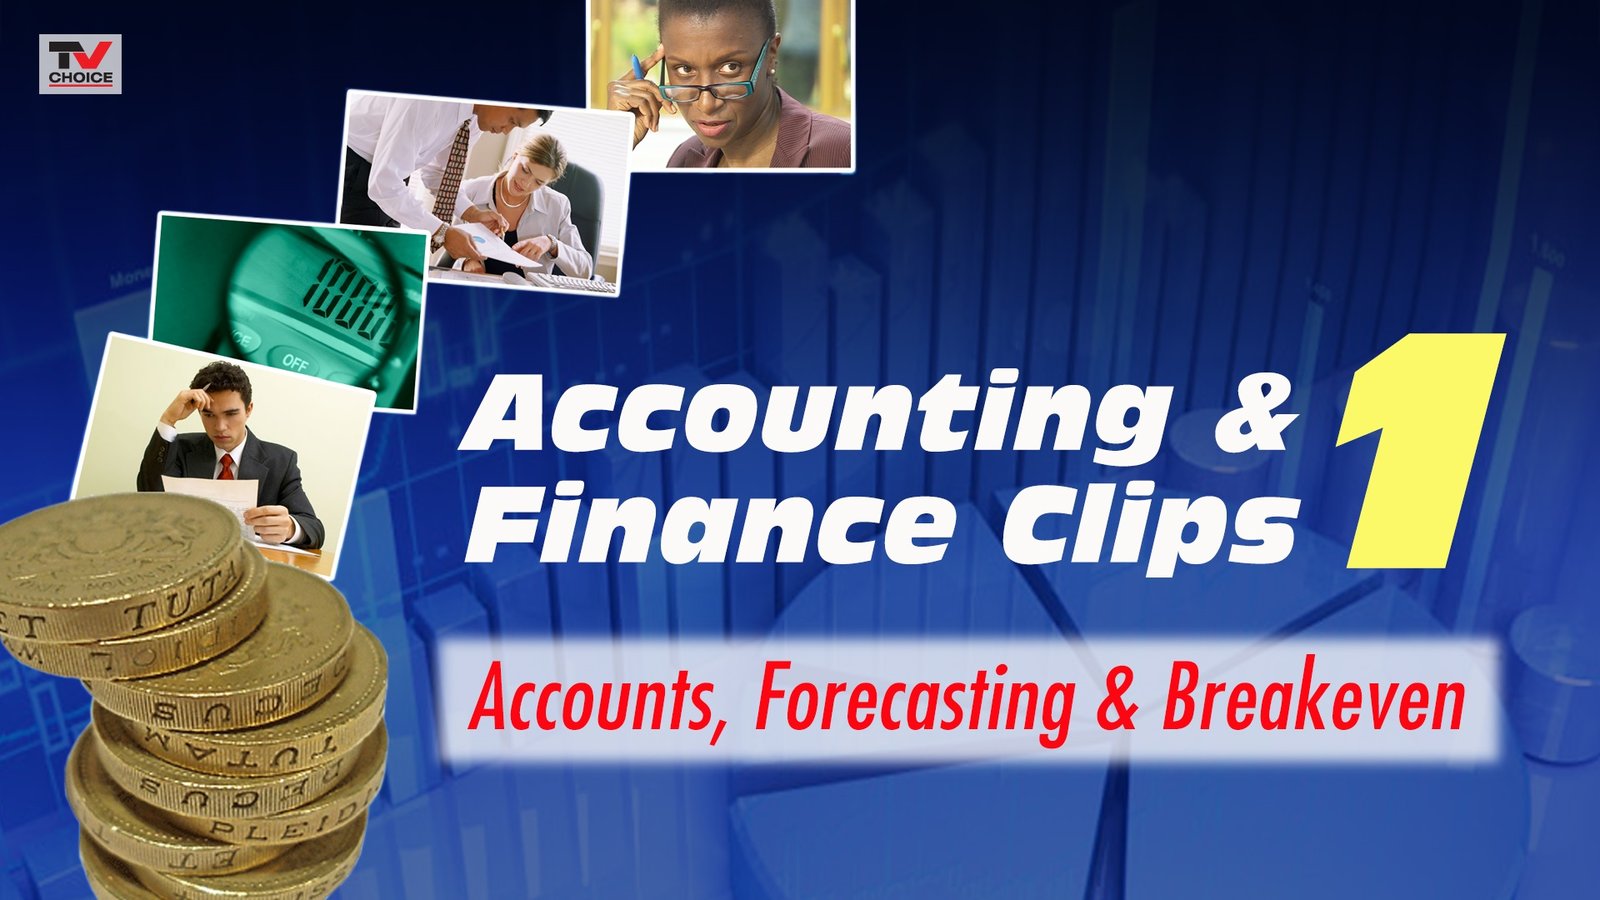 Accounting and Finance Clips 1: Accounts, Forecasting and Breakeven